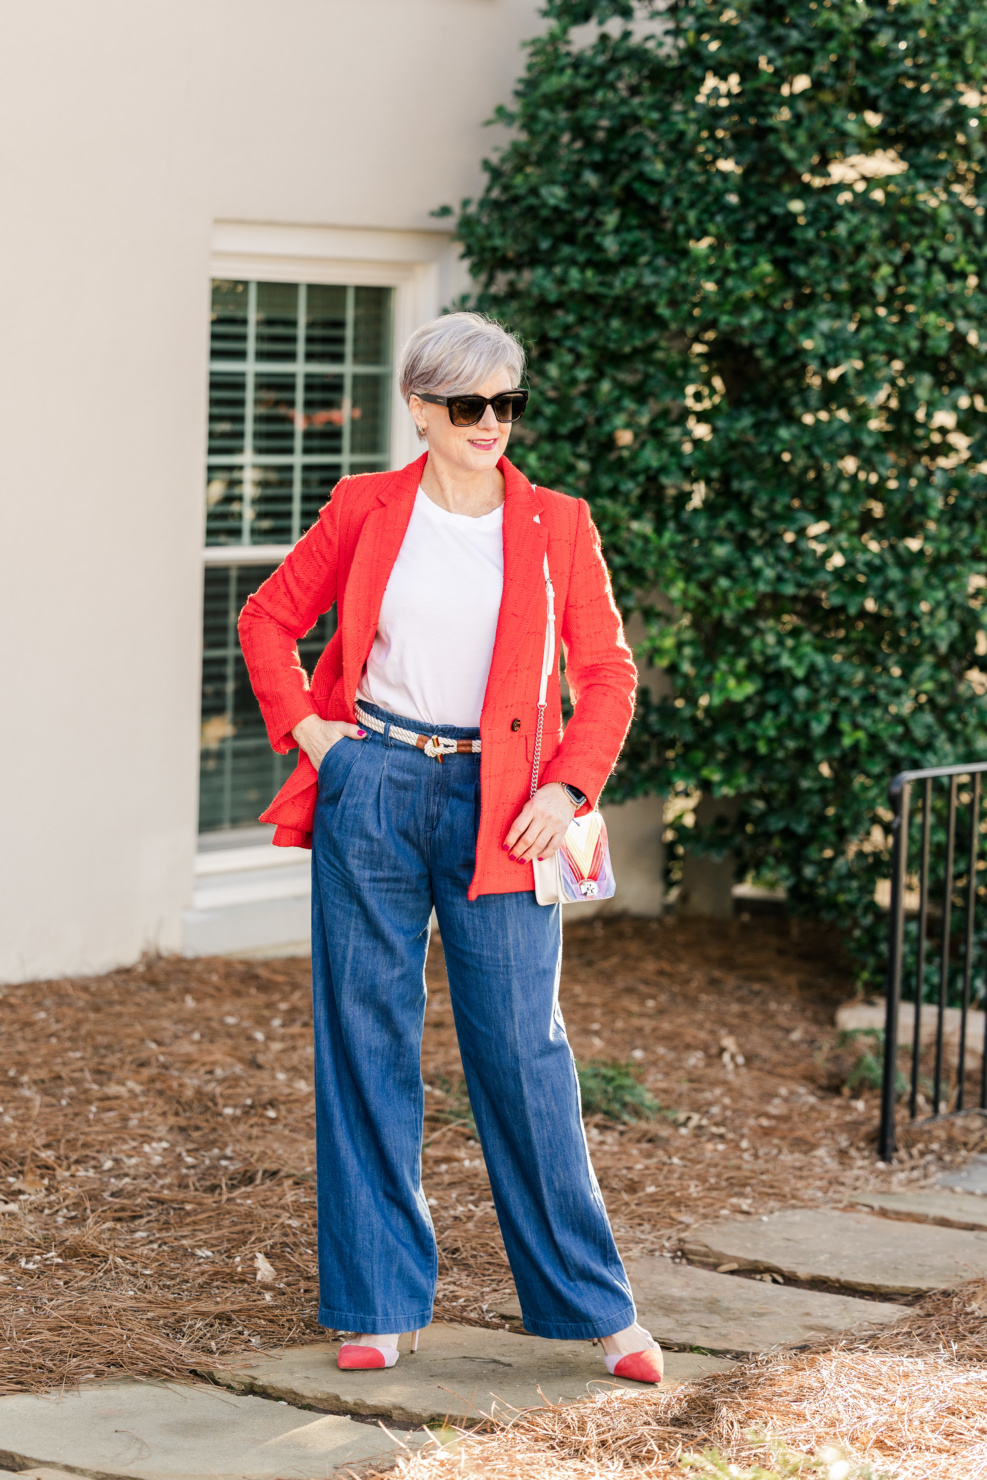 Wide-leg jeans this Spring are in for women. See the how to style